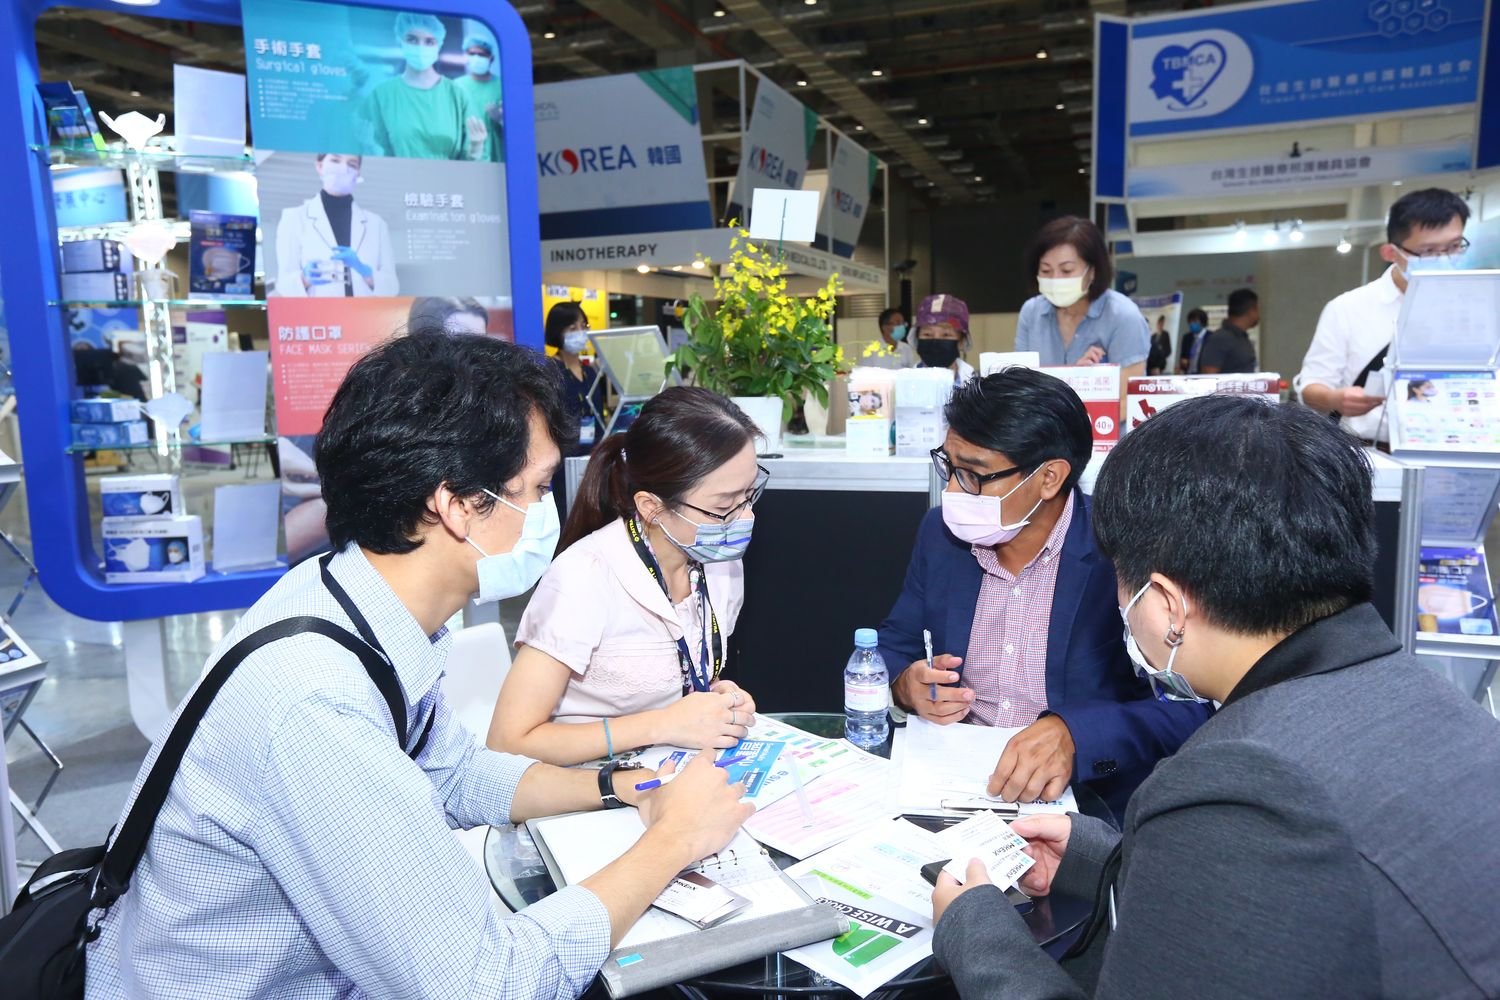 Medical Taiwan Integrates Five Themes Digital Leap Supply Chain Innovation Force People Centric Future And All Age Healthcare To Create The Best Matchmaking Platform For All The Attendees  22406.JPG